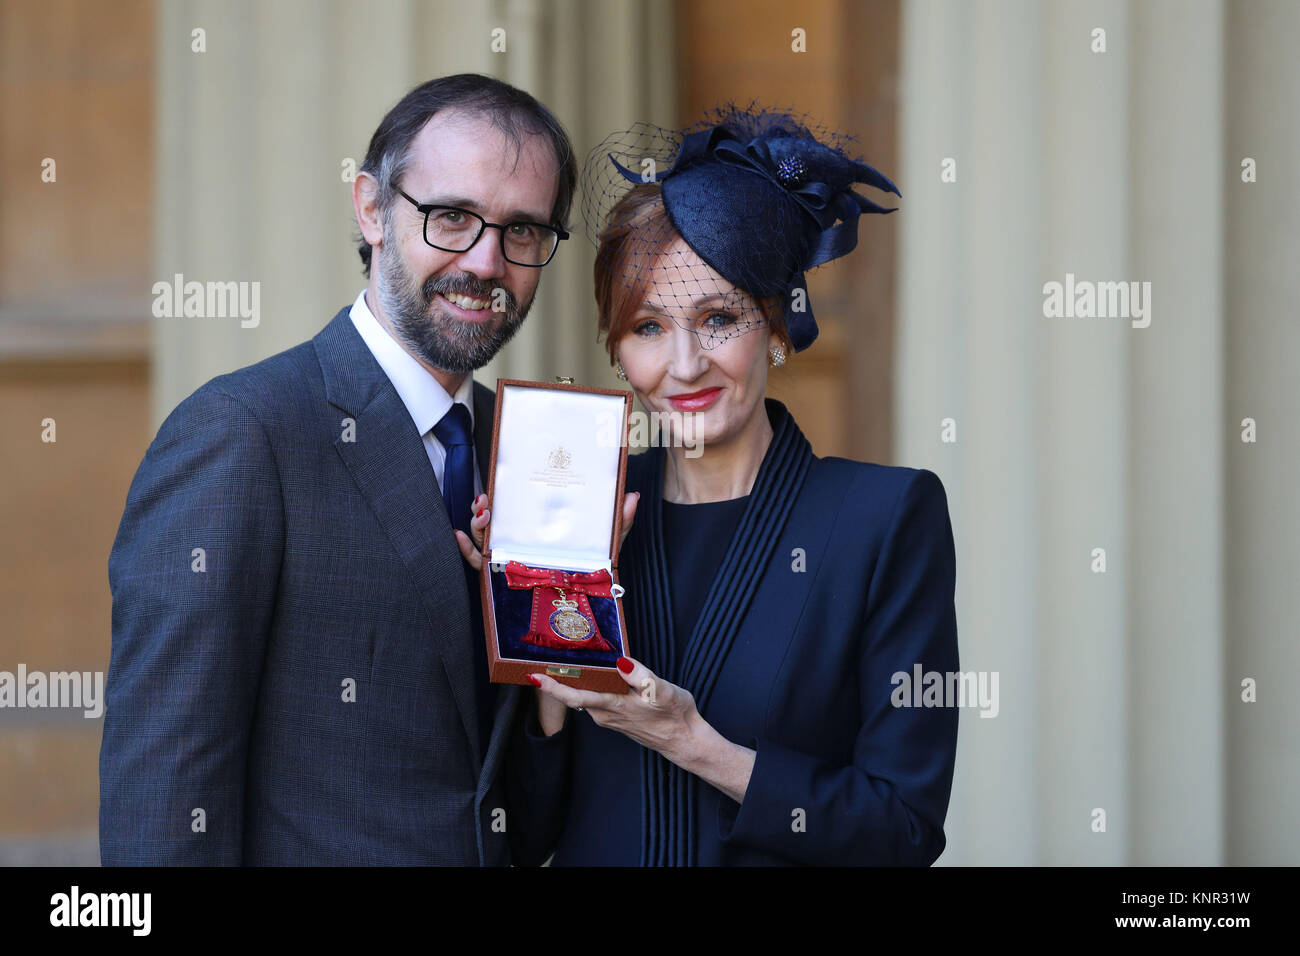 Harry Potter author JK Rowling with her husband Neil Murray after she was made a Companion of Honour by the Duke of Cambridge during an Investiture ceremony at Buckingham Palace, London. Stock Photo